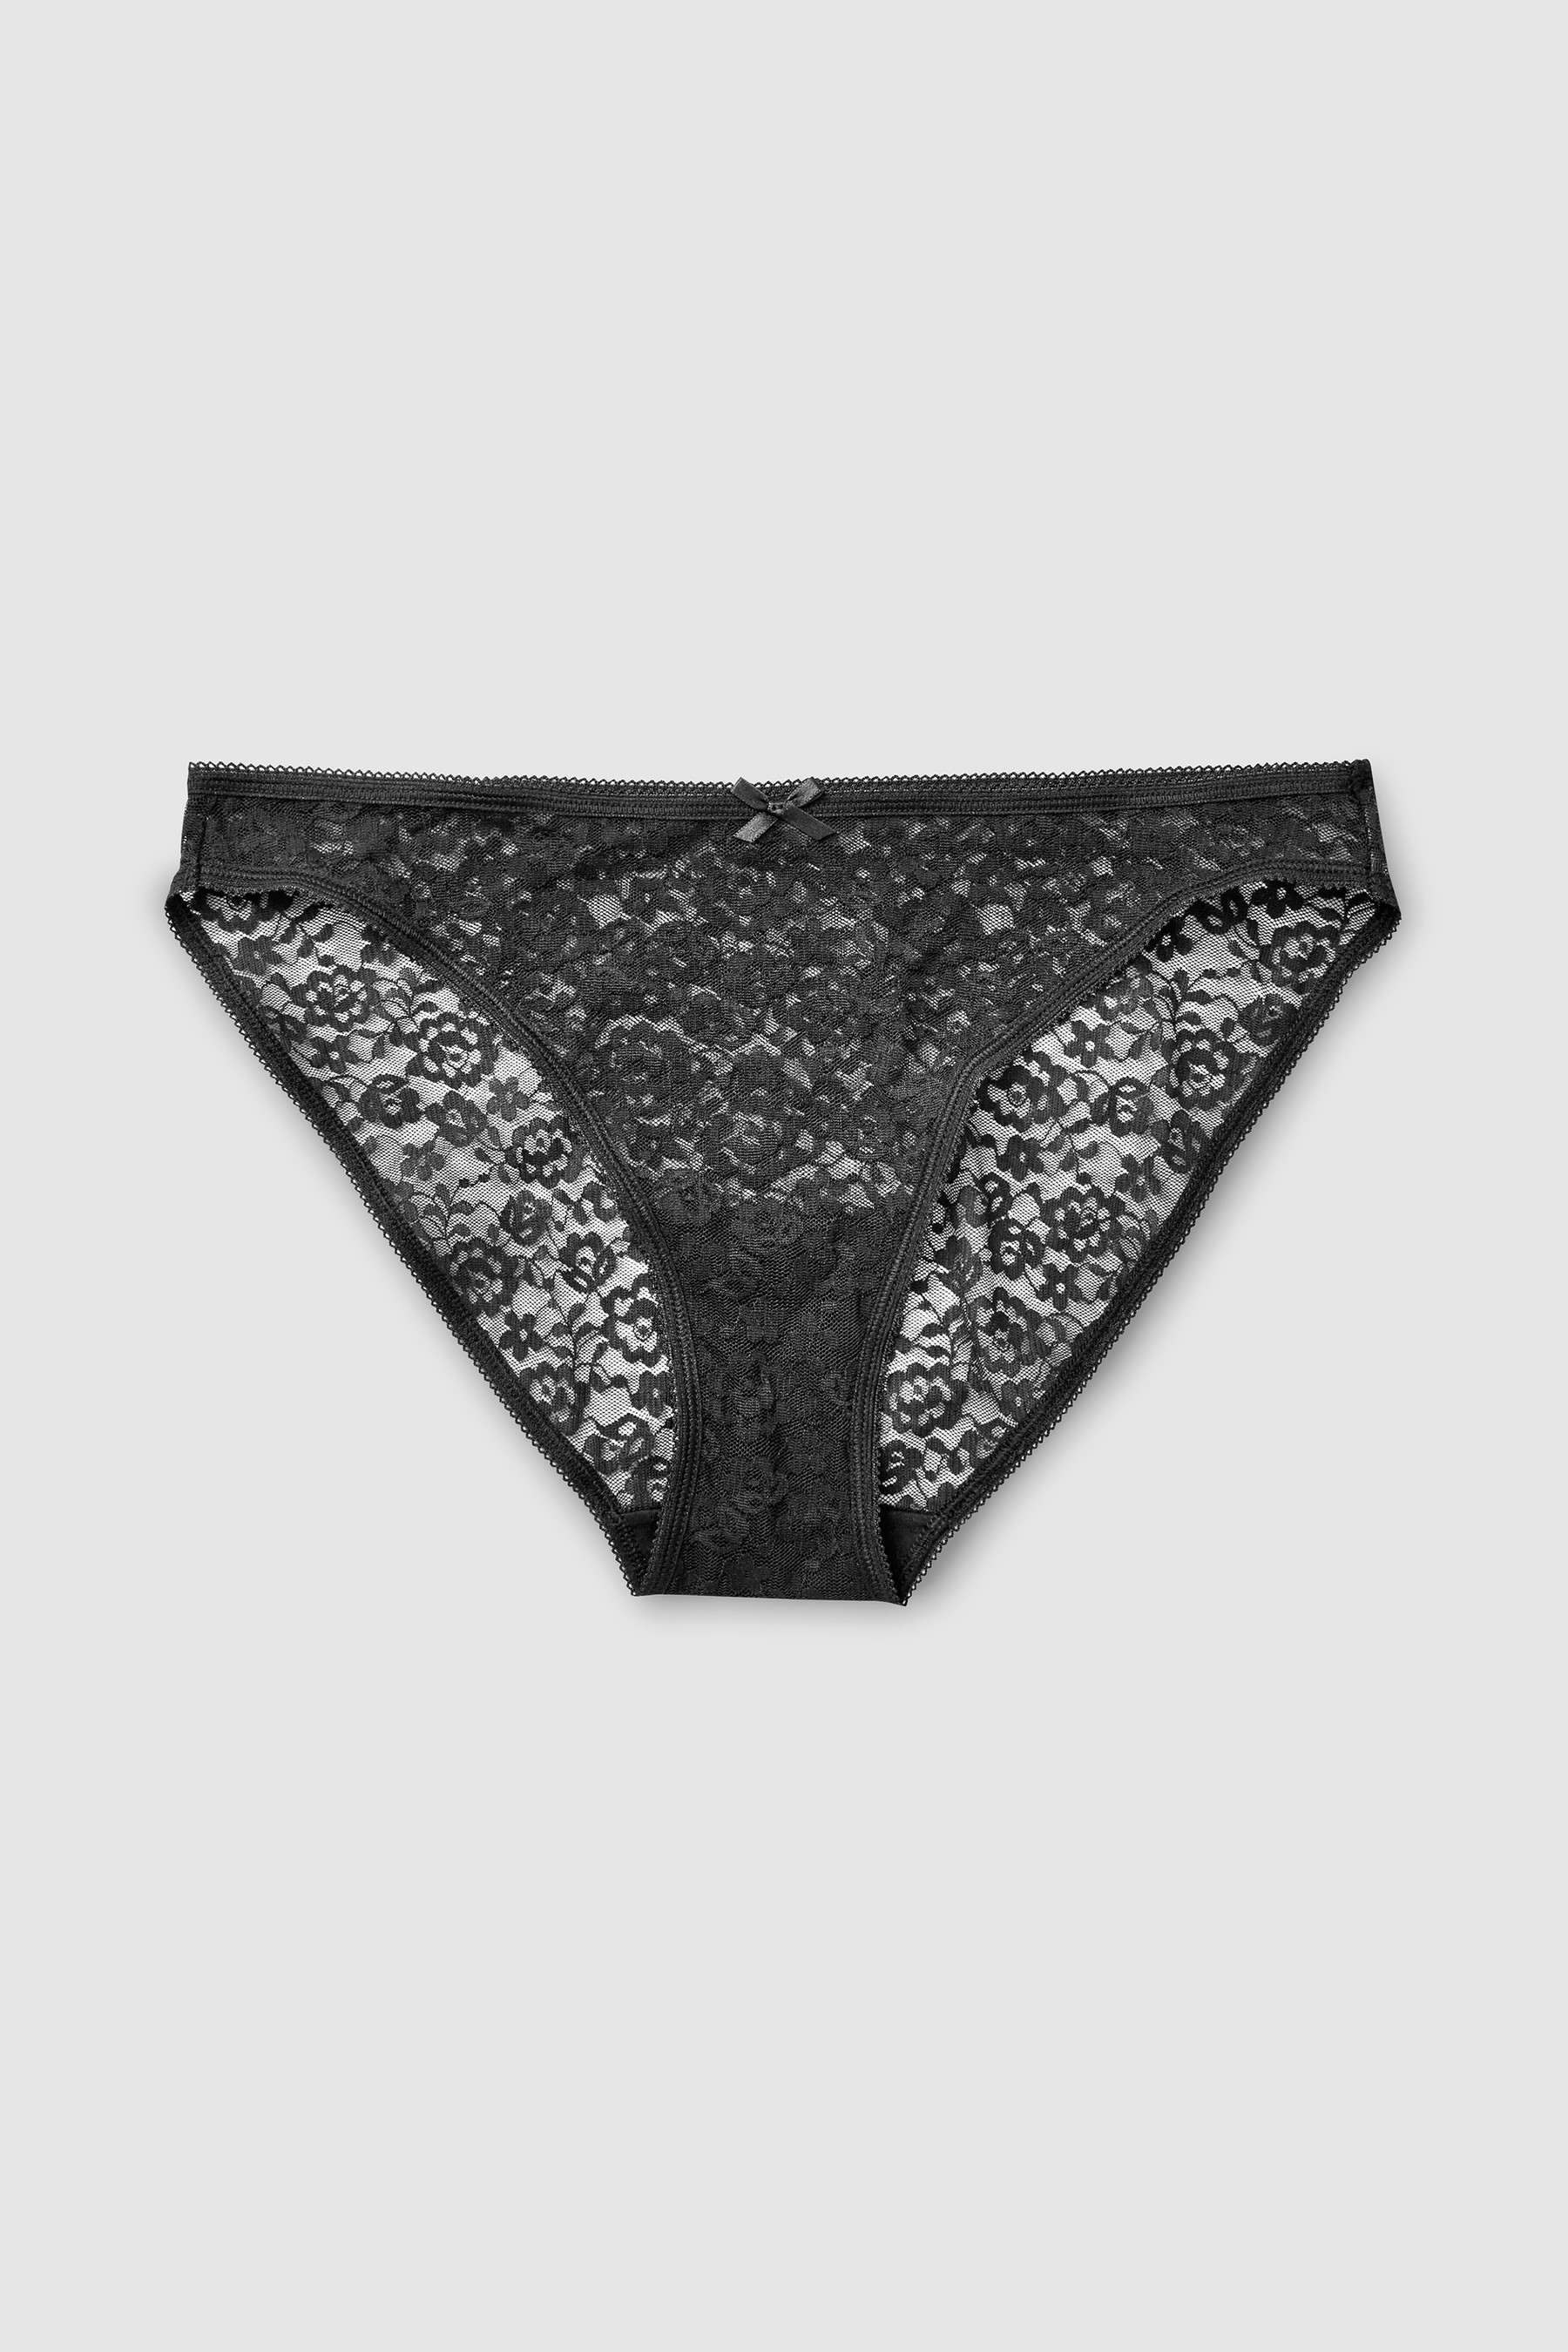 Lace Knickers 4 Pack High Leg